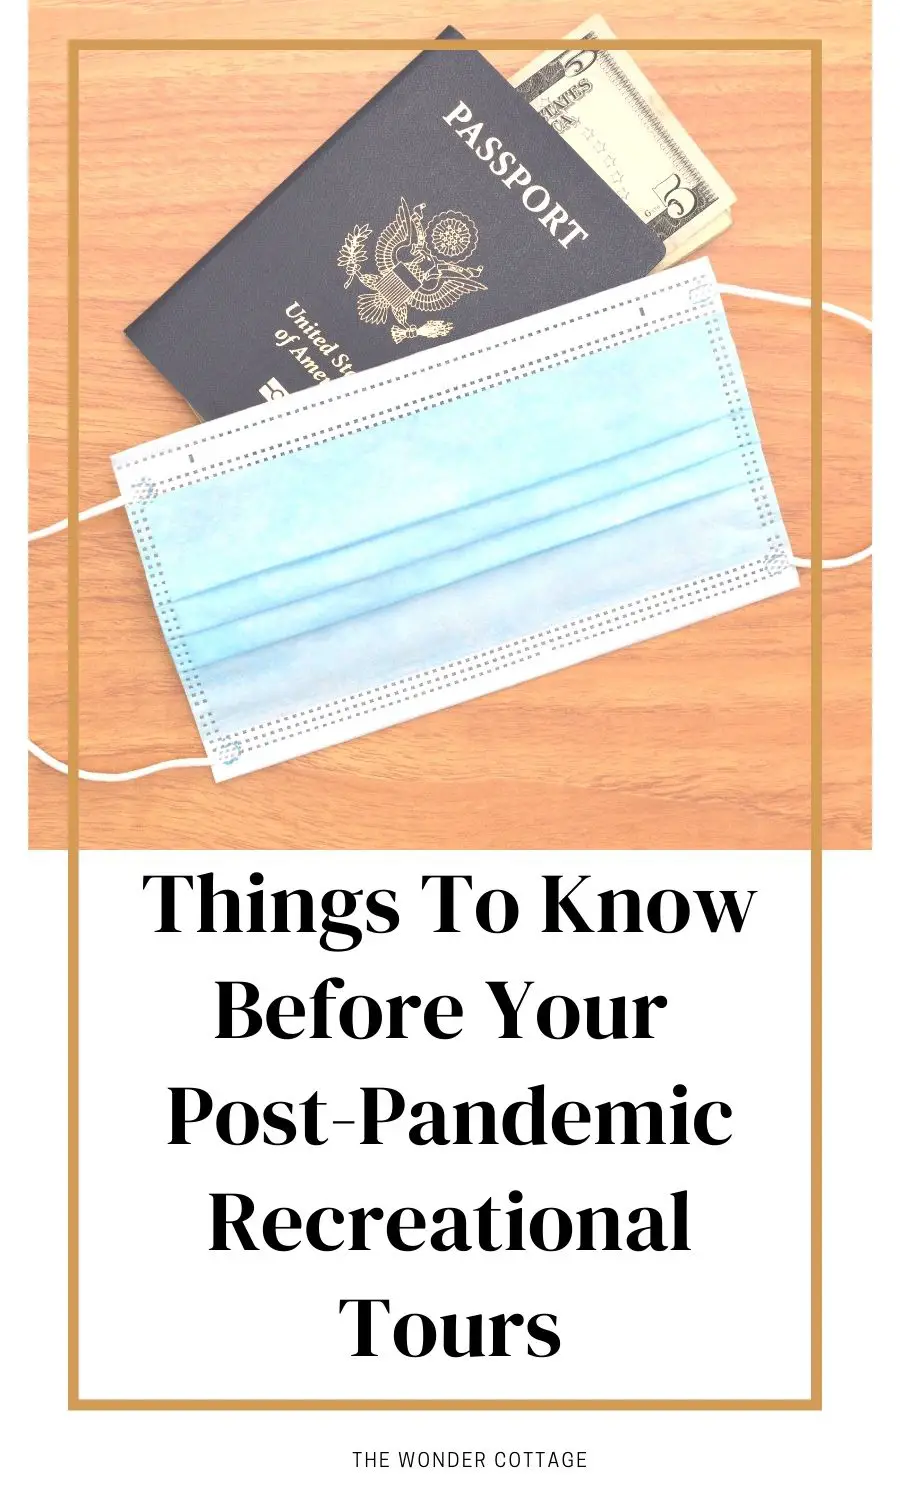 Things To Know Before Your Post-Pandemic Recreational Tours